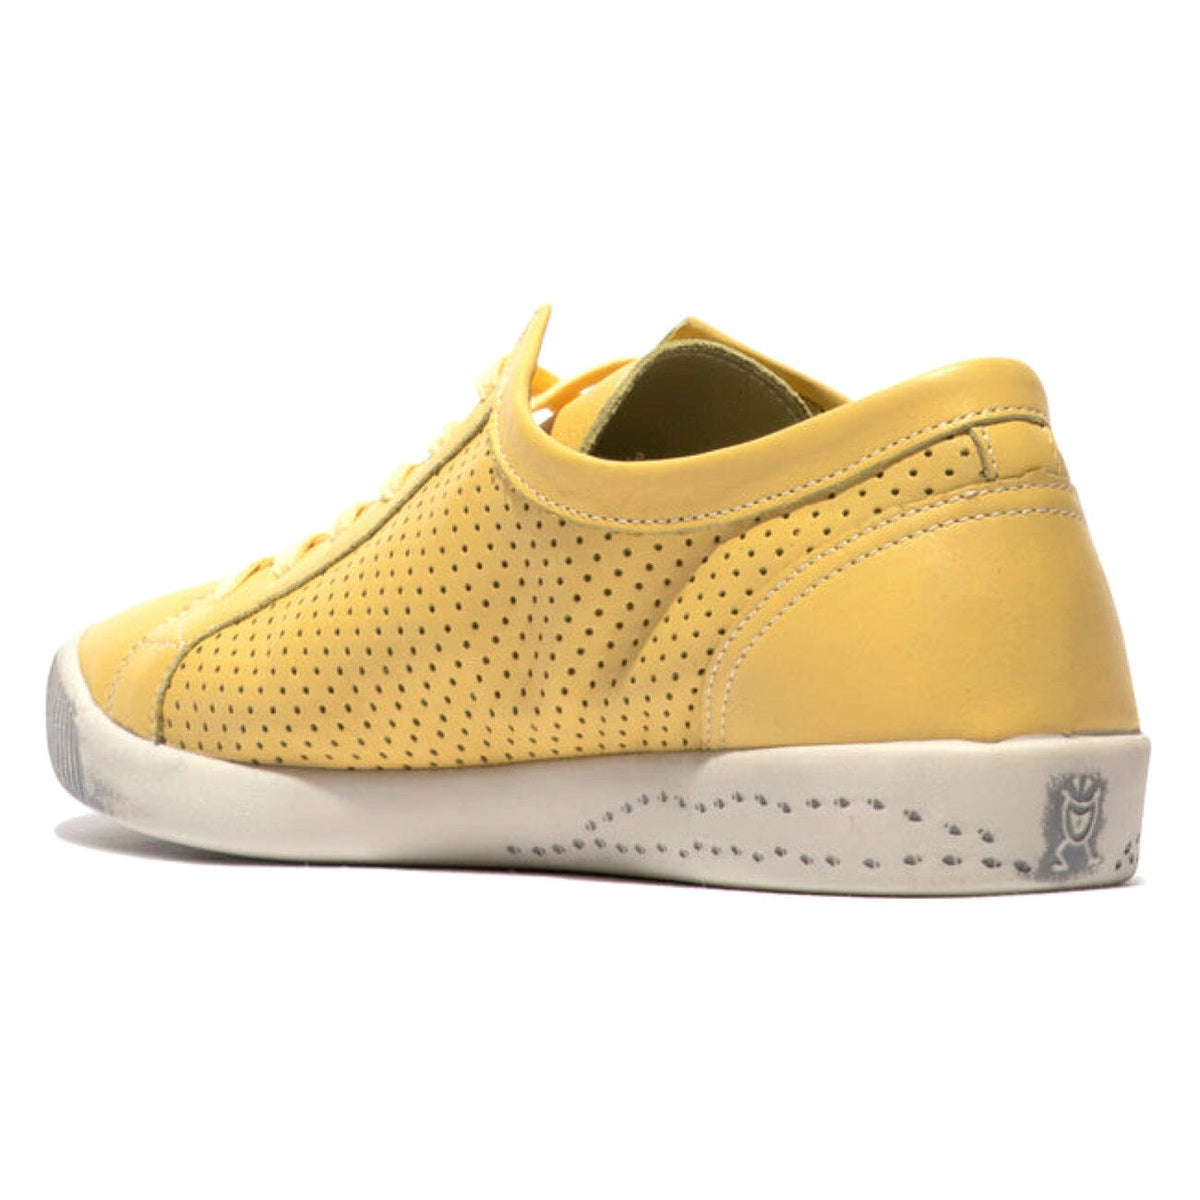 Softinos, Ica388, Laceup Shoe, Smooth Leather, Light Yellow Shoes Softinos 